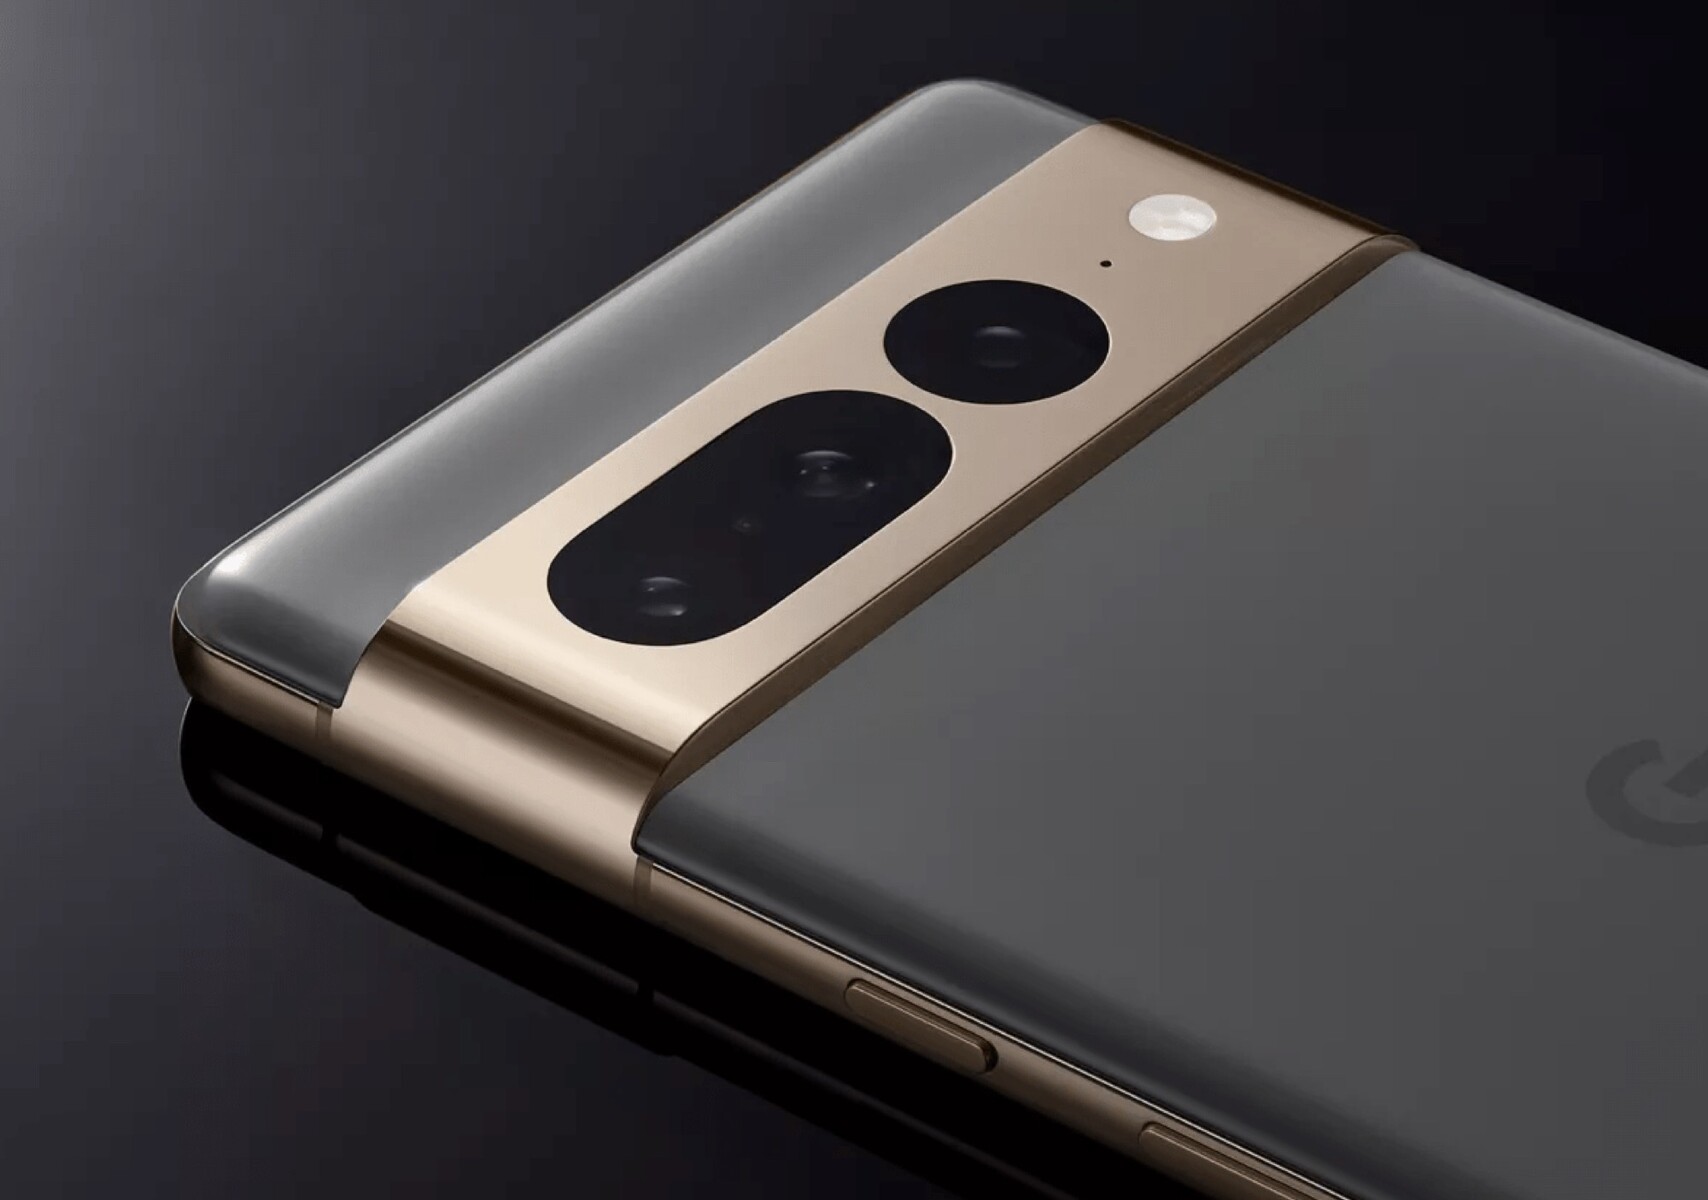 Google Pixel 7 Pro may have a worse telephoto camera than the Pixel 6